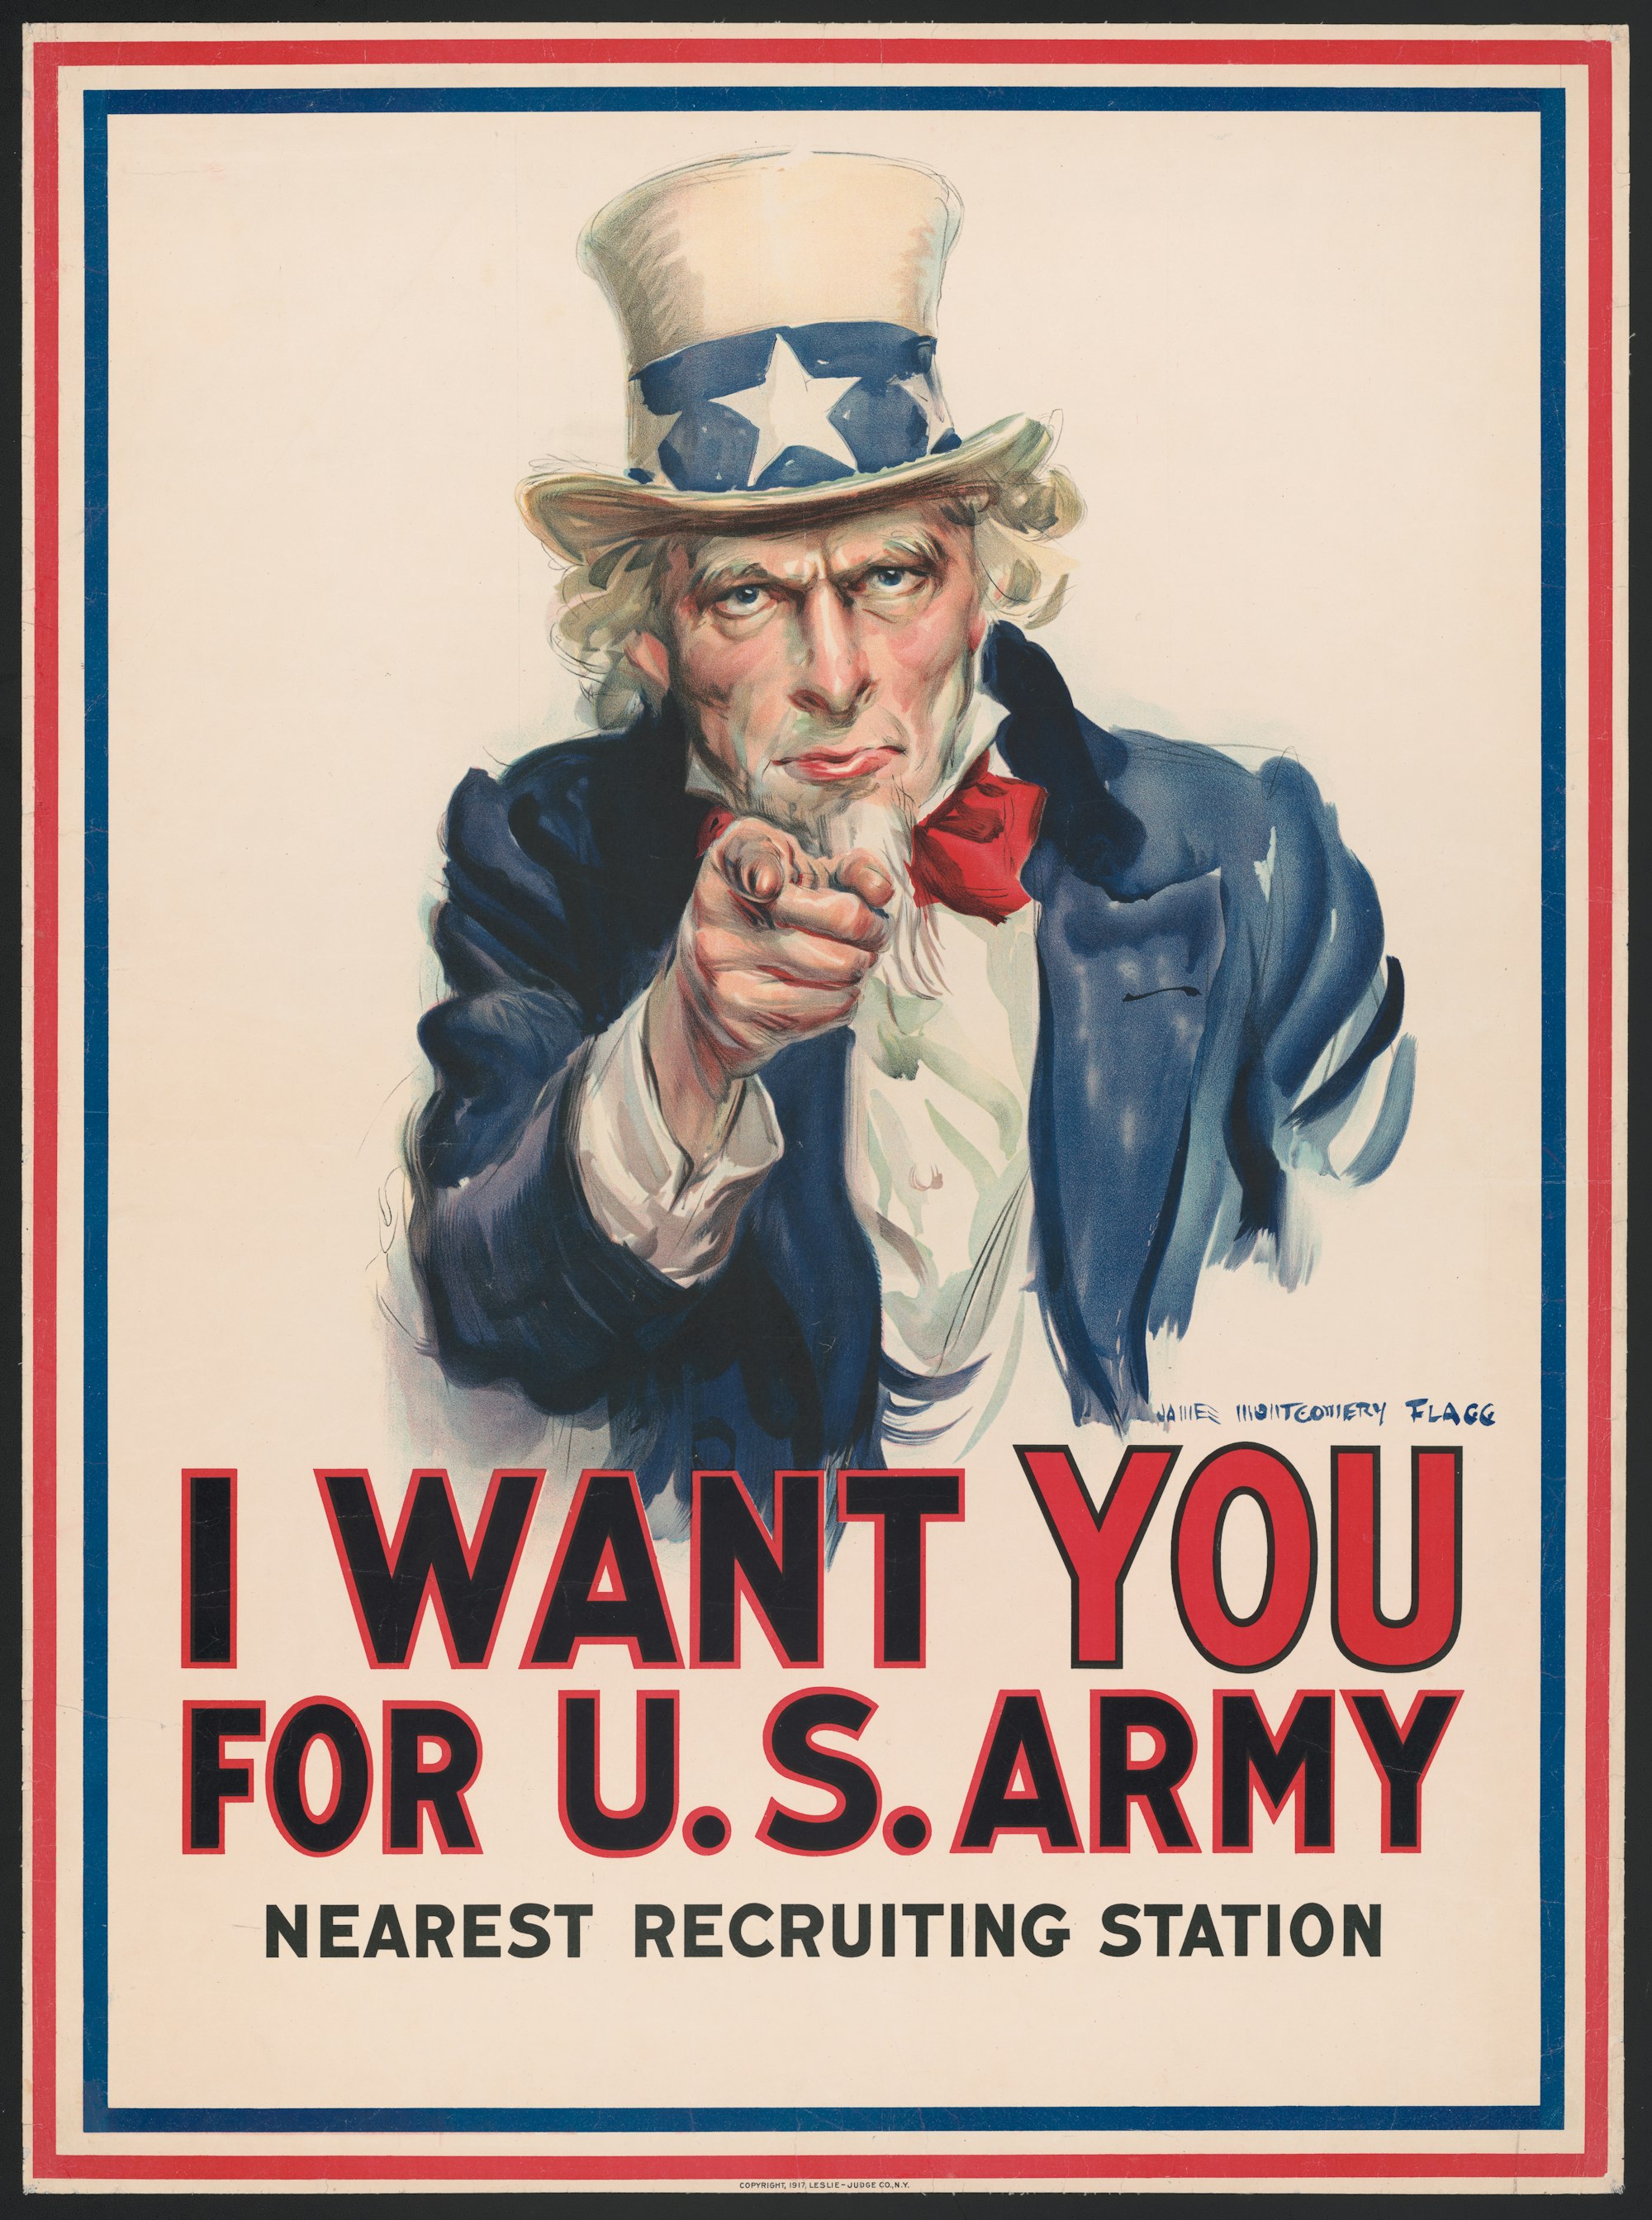 I want you for U.S. Army: nearest recruiting station. Poster by James Montgomery Flagg, ca. 1917. From the Posters: World War I Collection. Library of Congress Prints & Photographs Division.

https://www.loc.gov/item/96507165/